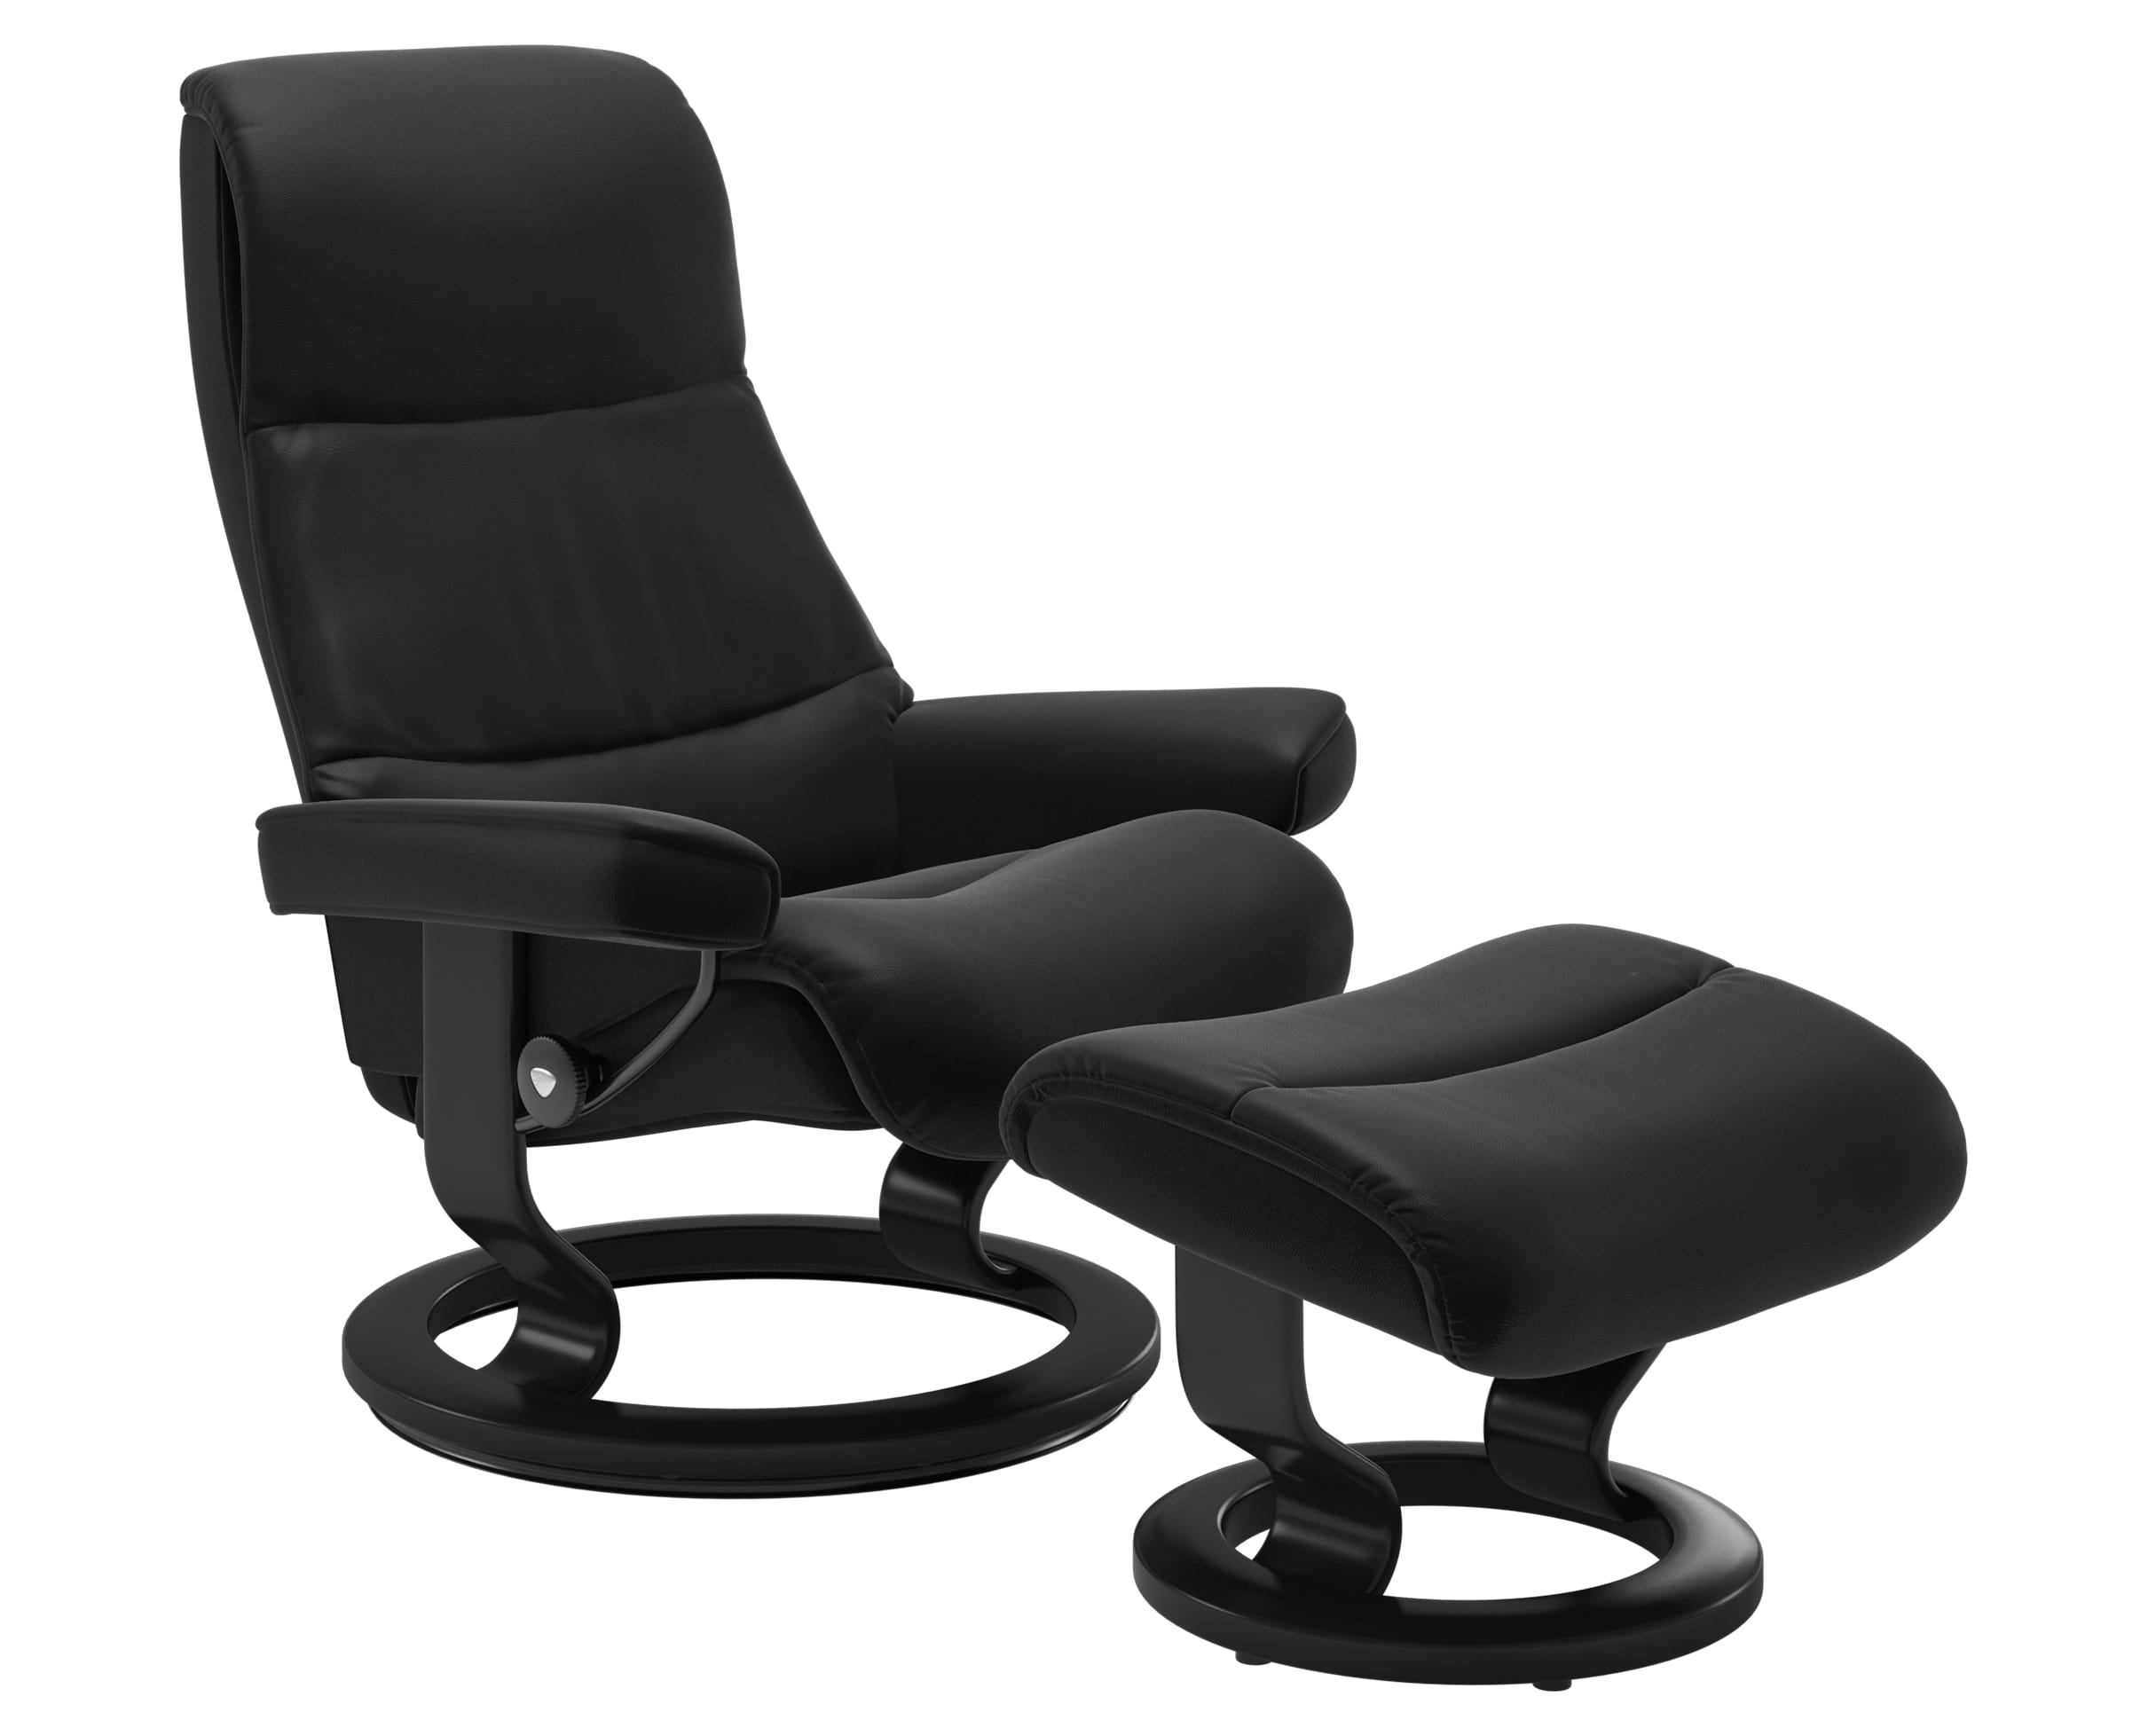 Paloma Leather Special Black S/M/L &amp; Black Base | Stressless View Classic Recliner | Valley Ridge Furniture